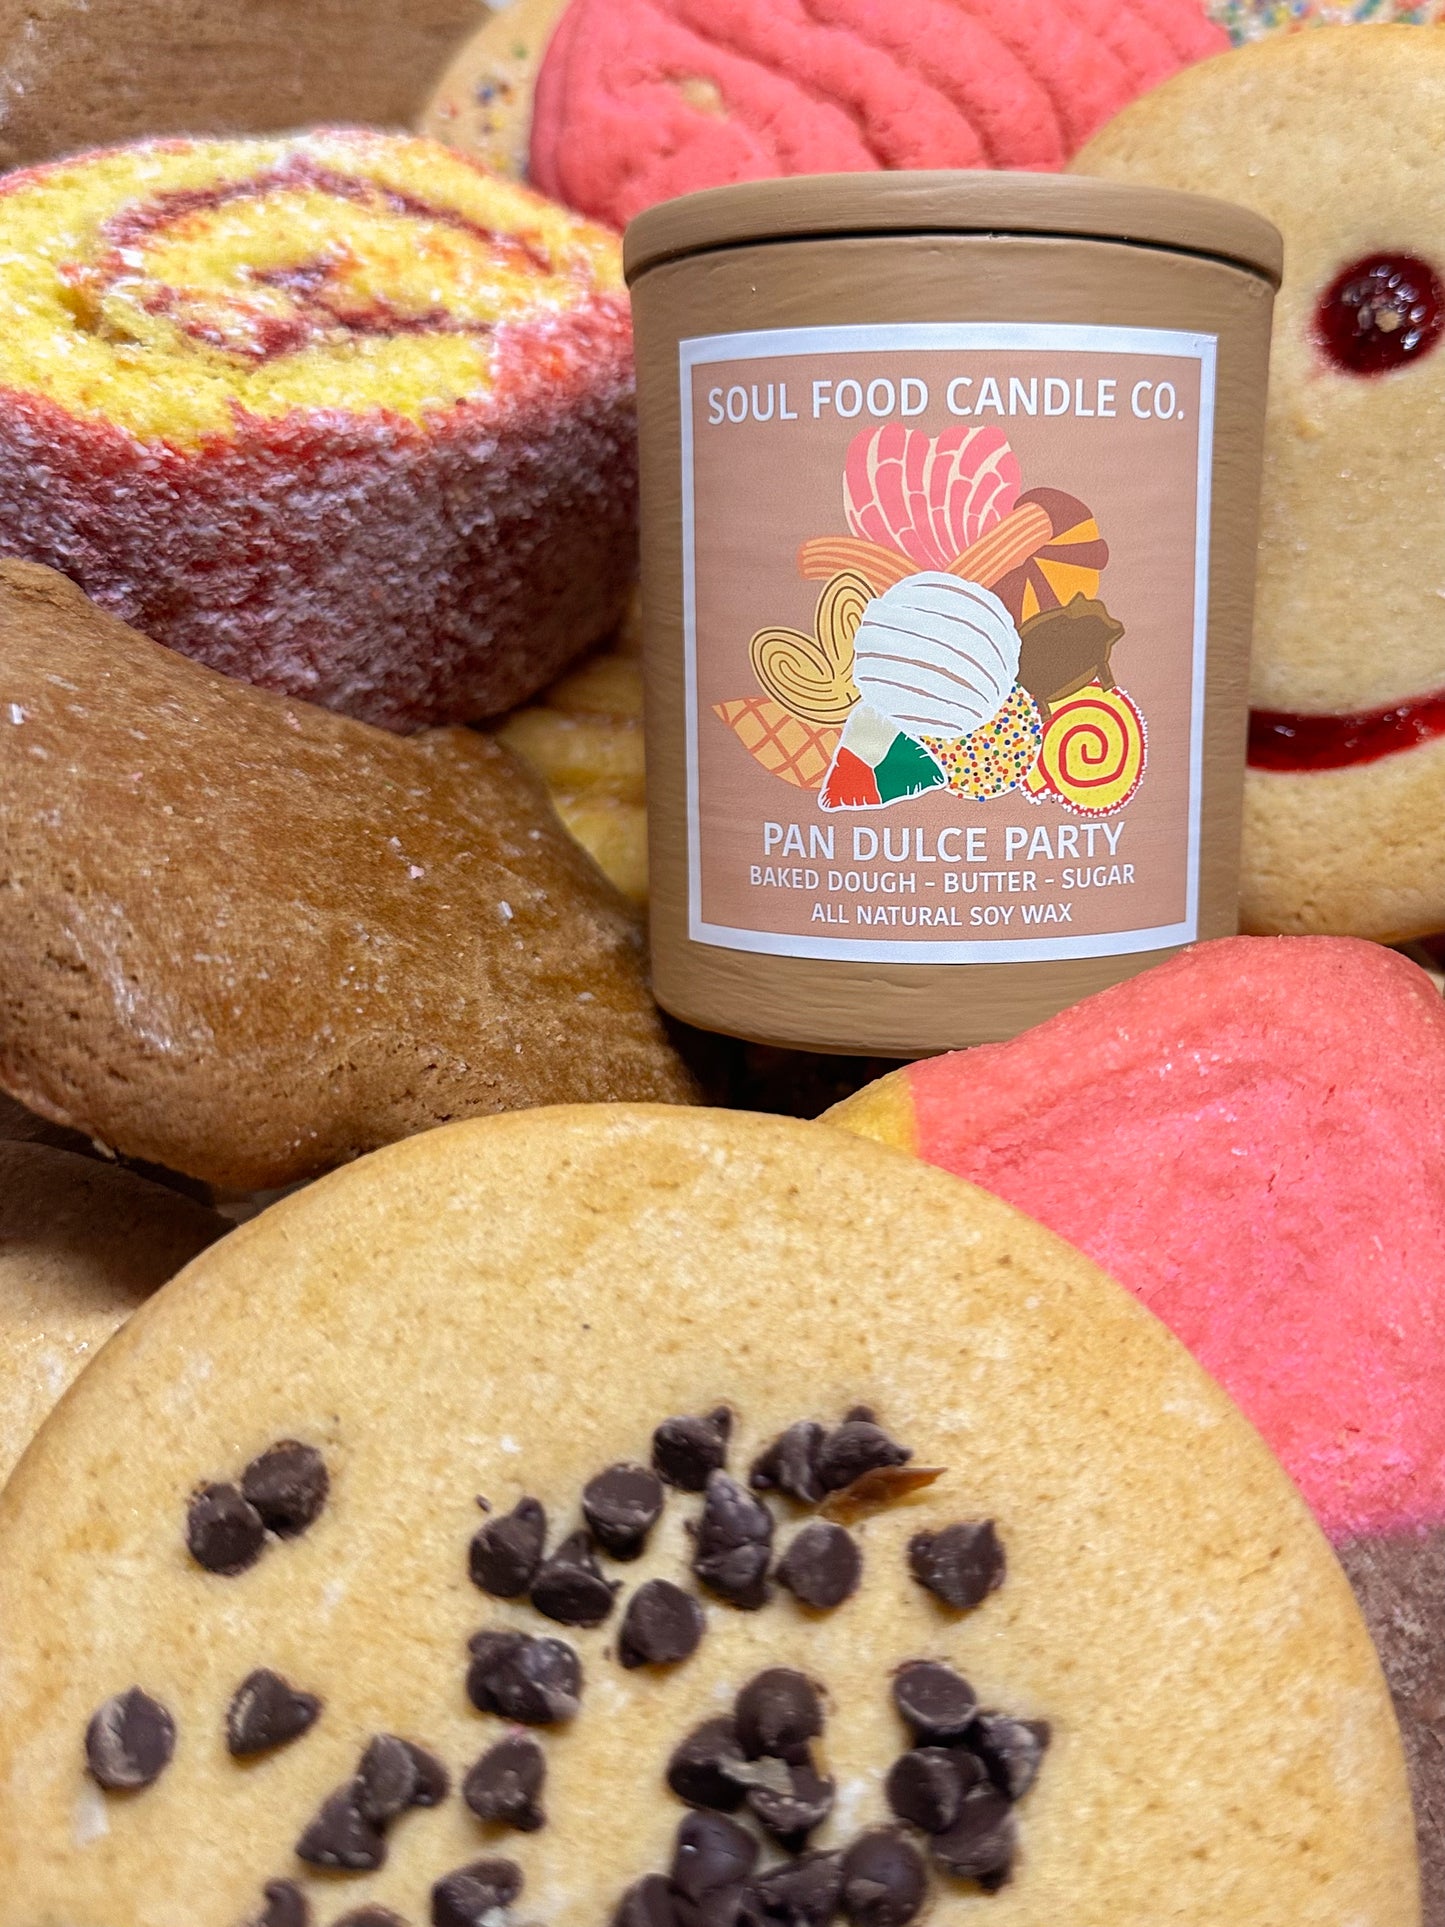 Pan Dulce Party - Soul Food Candle Company